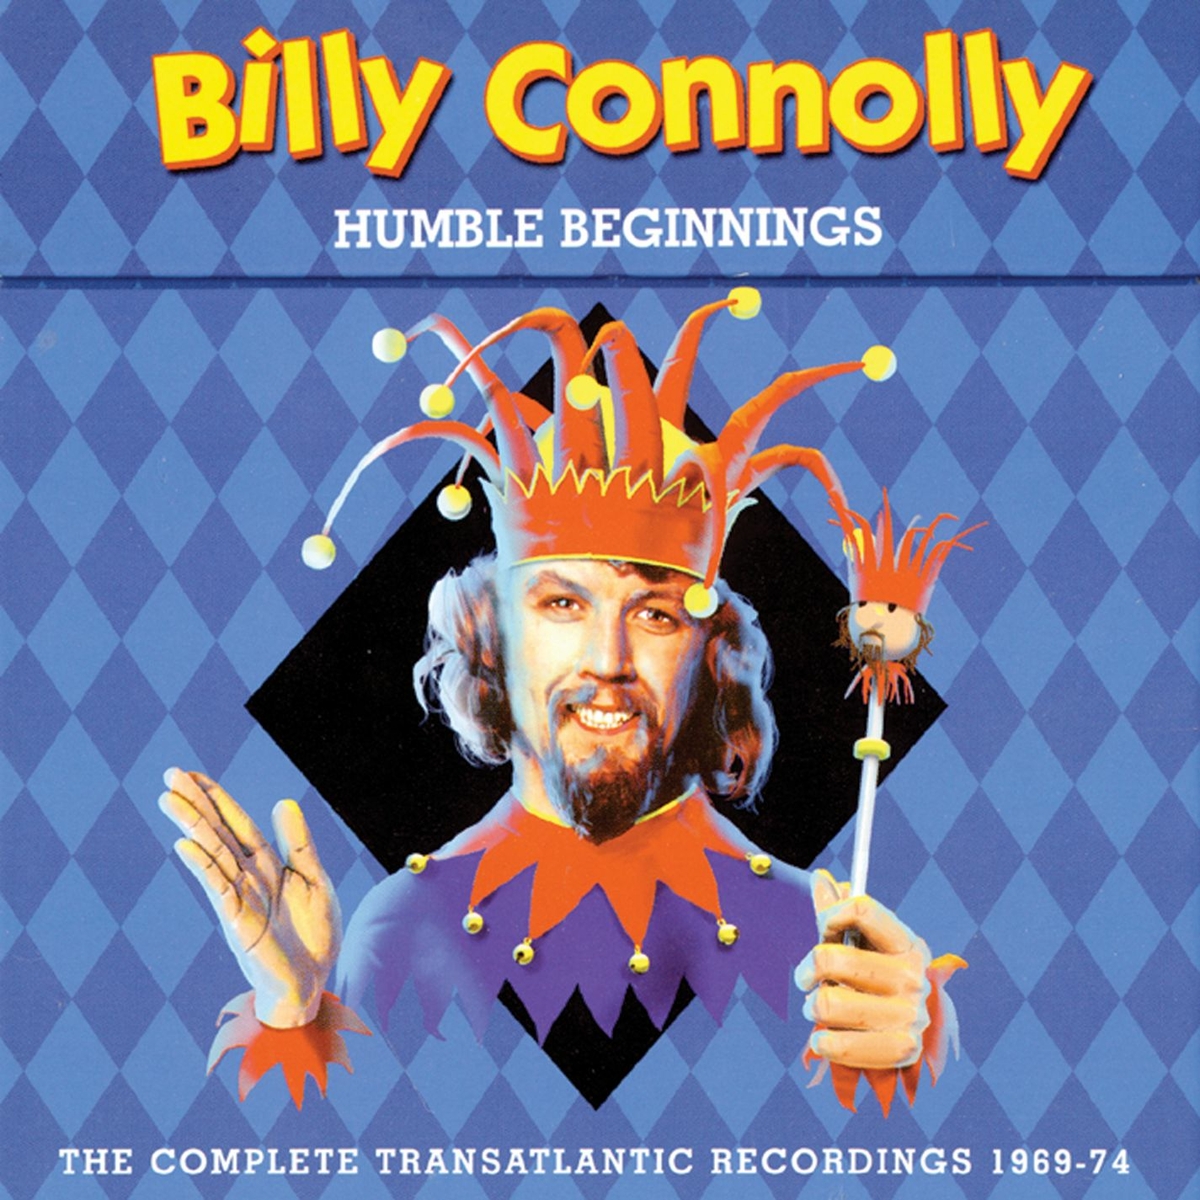 Billy Connolly, The Humblebums – 2003 - Humble Beginnings: The Complete Transatlantic Recordings 1969-74